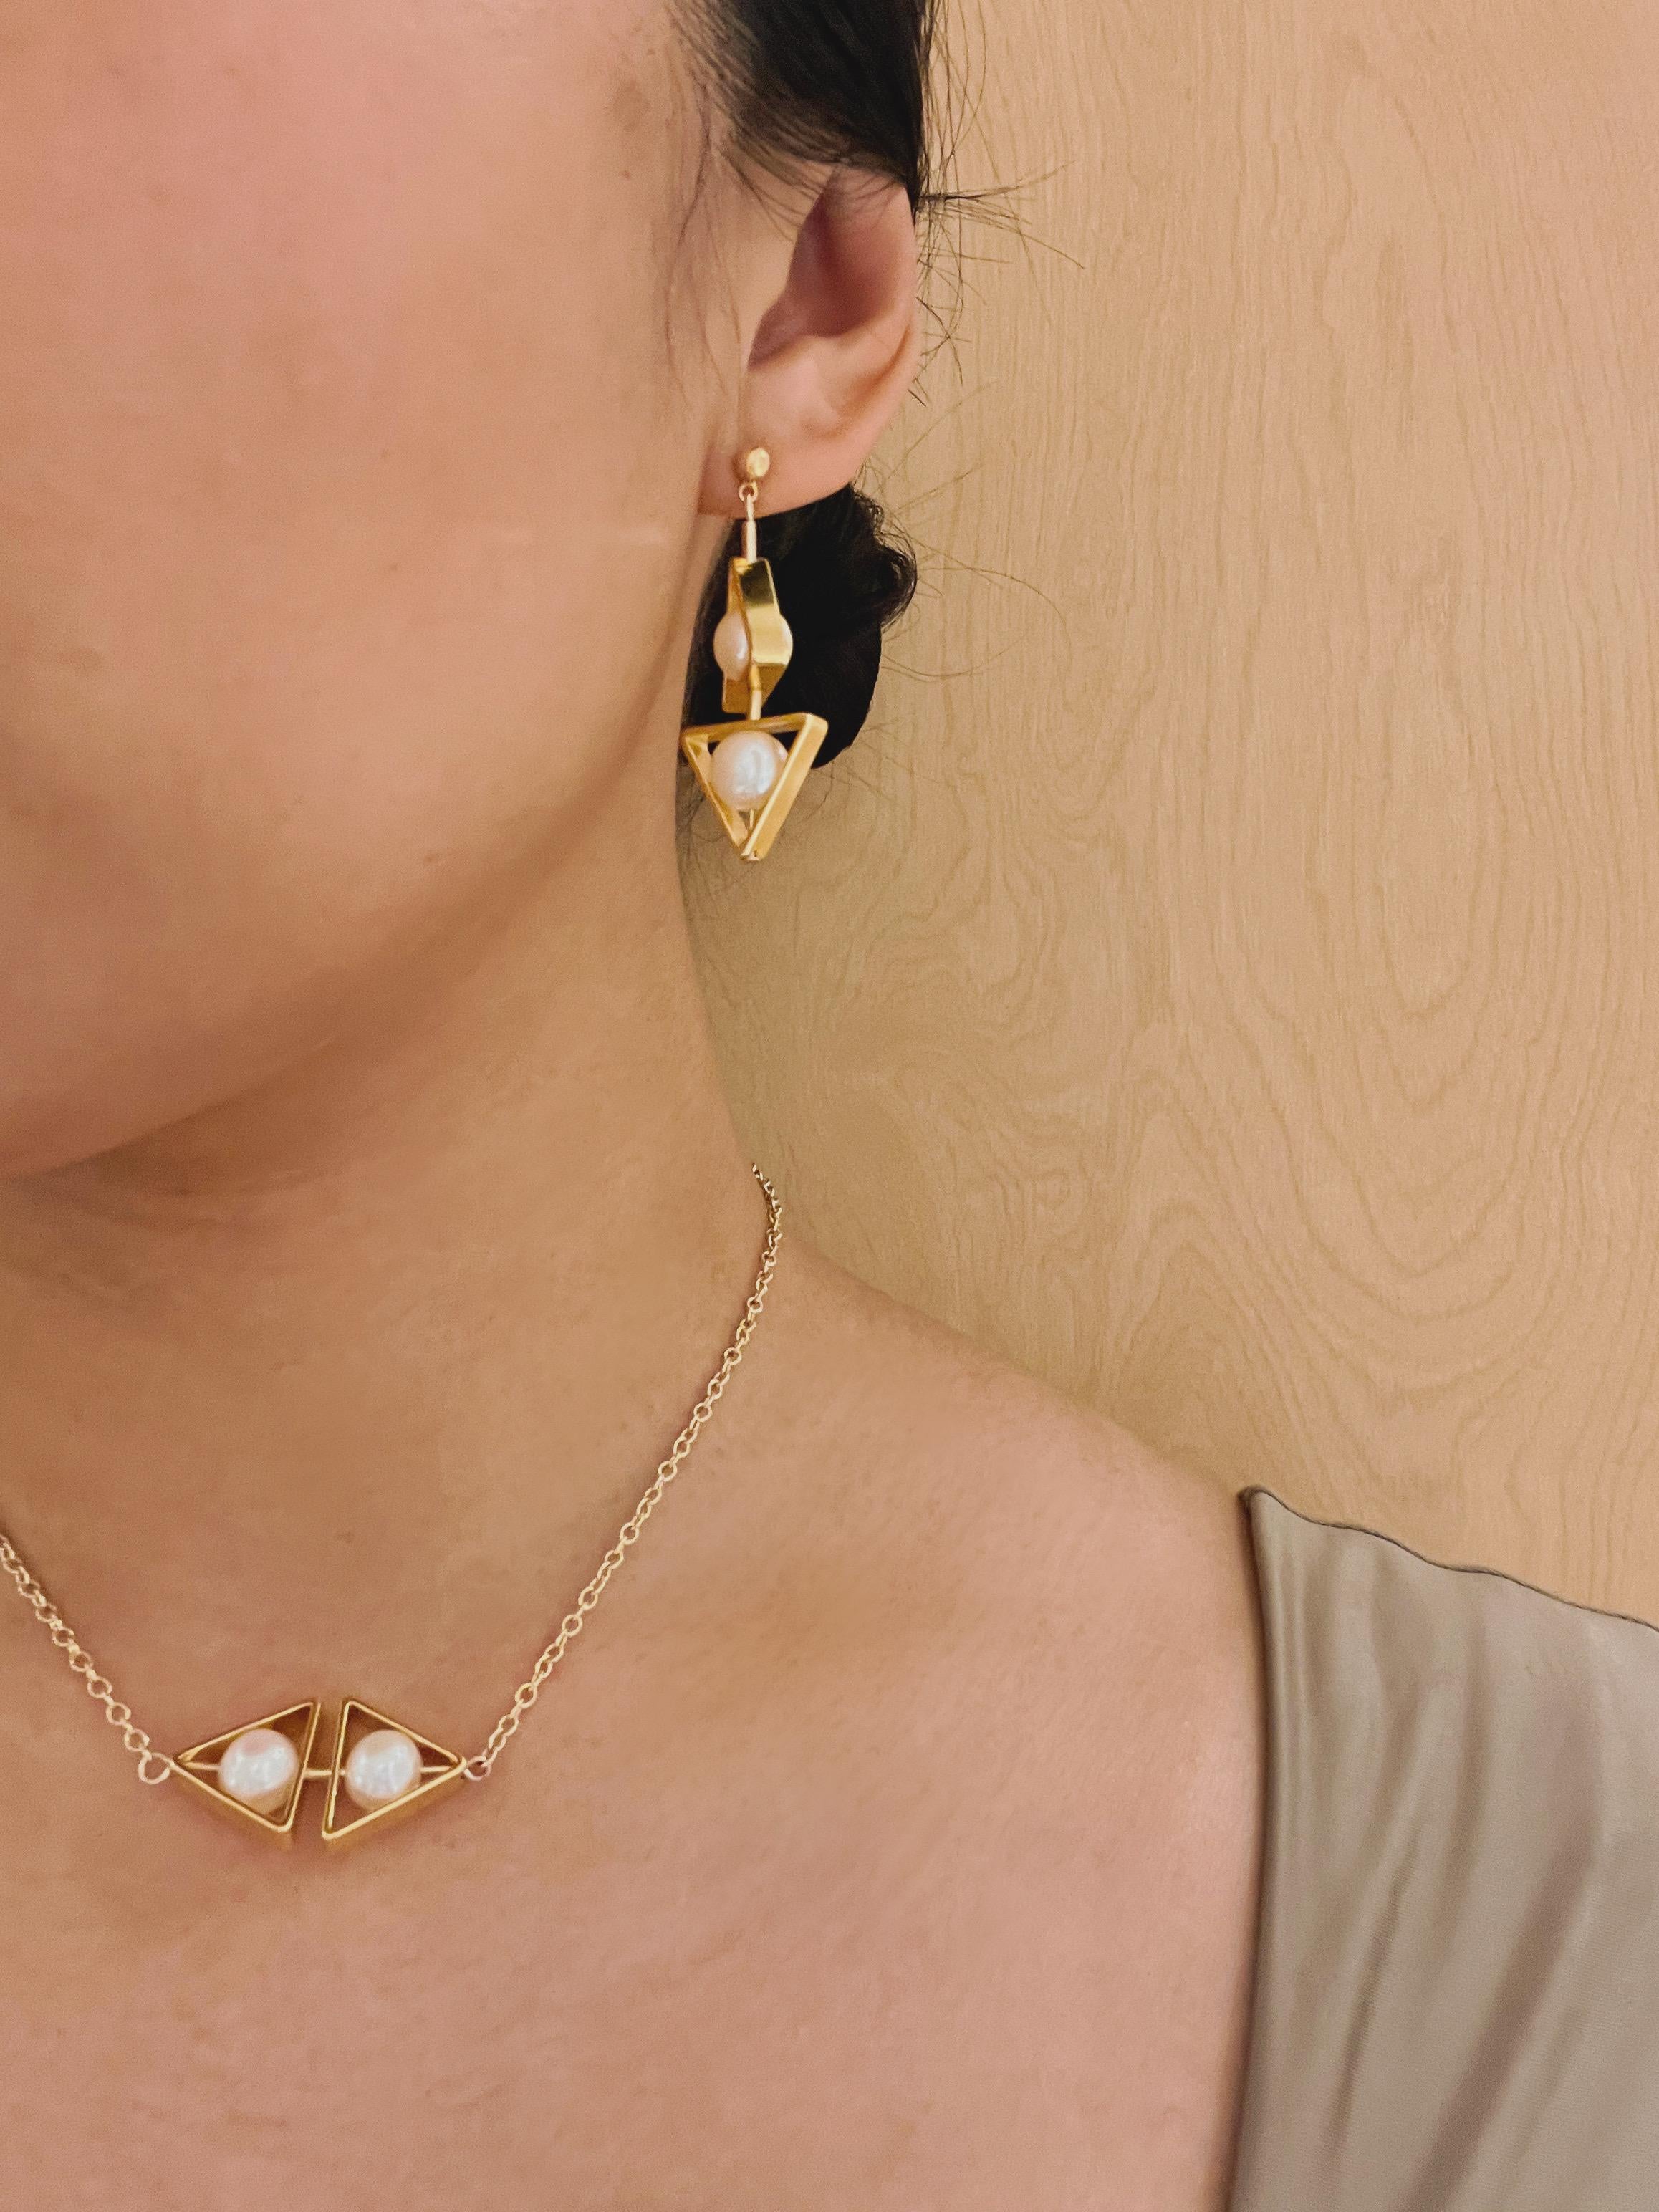 The earrings are light weight and are made to rotate and reposition with movement.

The earrings consist of triangle freshwater pearls, gold filled findings and gold-plated brass metal shapes.

Due to the nature of this jewelry, it is